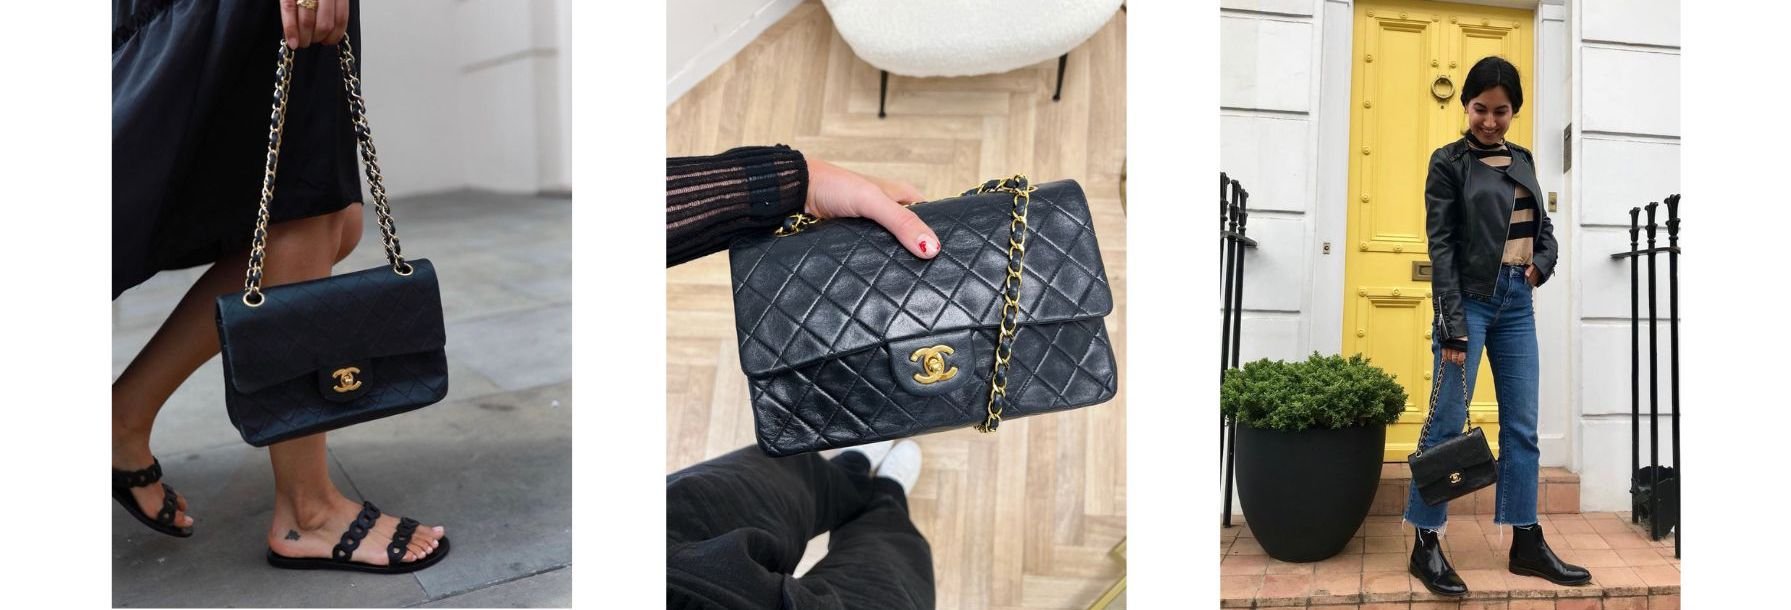 Top Designer Bags To Resell Now